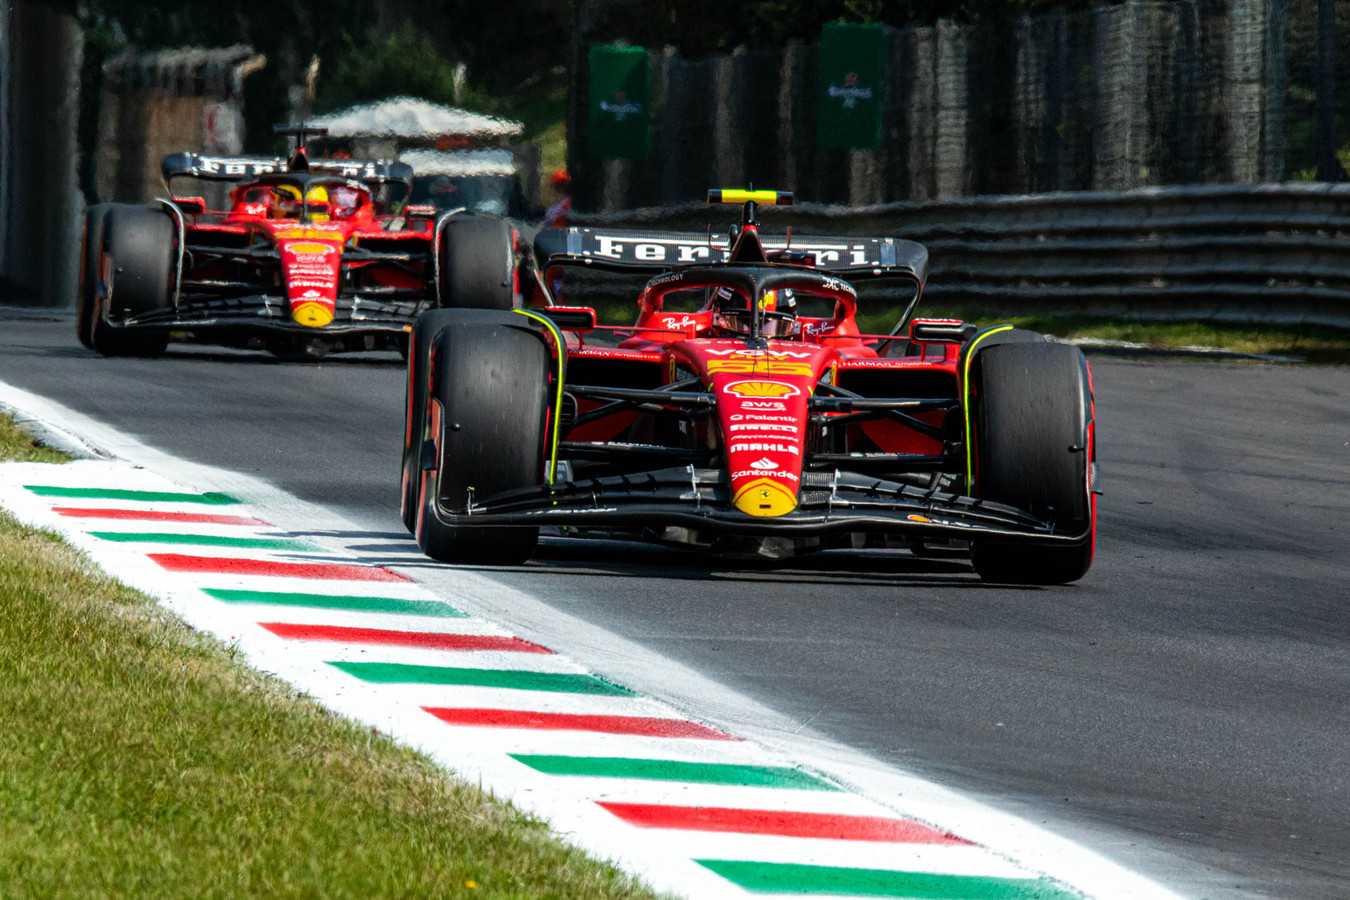 Carlos Sainz (55) leads Ferrari teammate Charles Leclerc (16) during the Saturday sessions at the Monza Circuit for the Formula 1 Italian Grand Prix